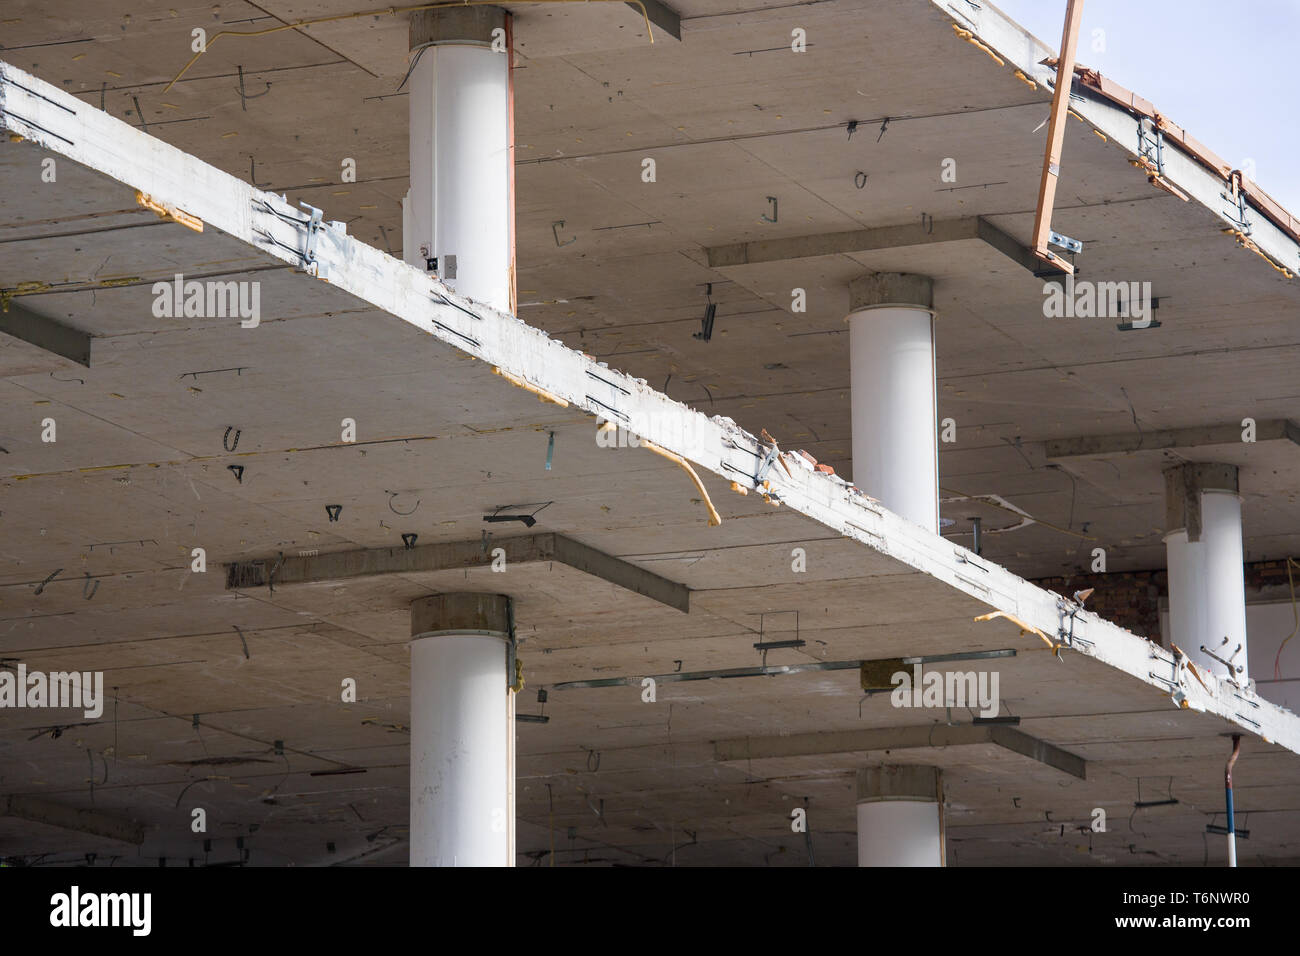 Demolition of a building with concrete floors and pillars Stock Photo